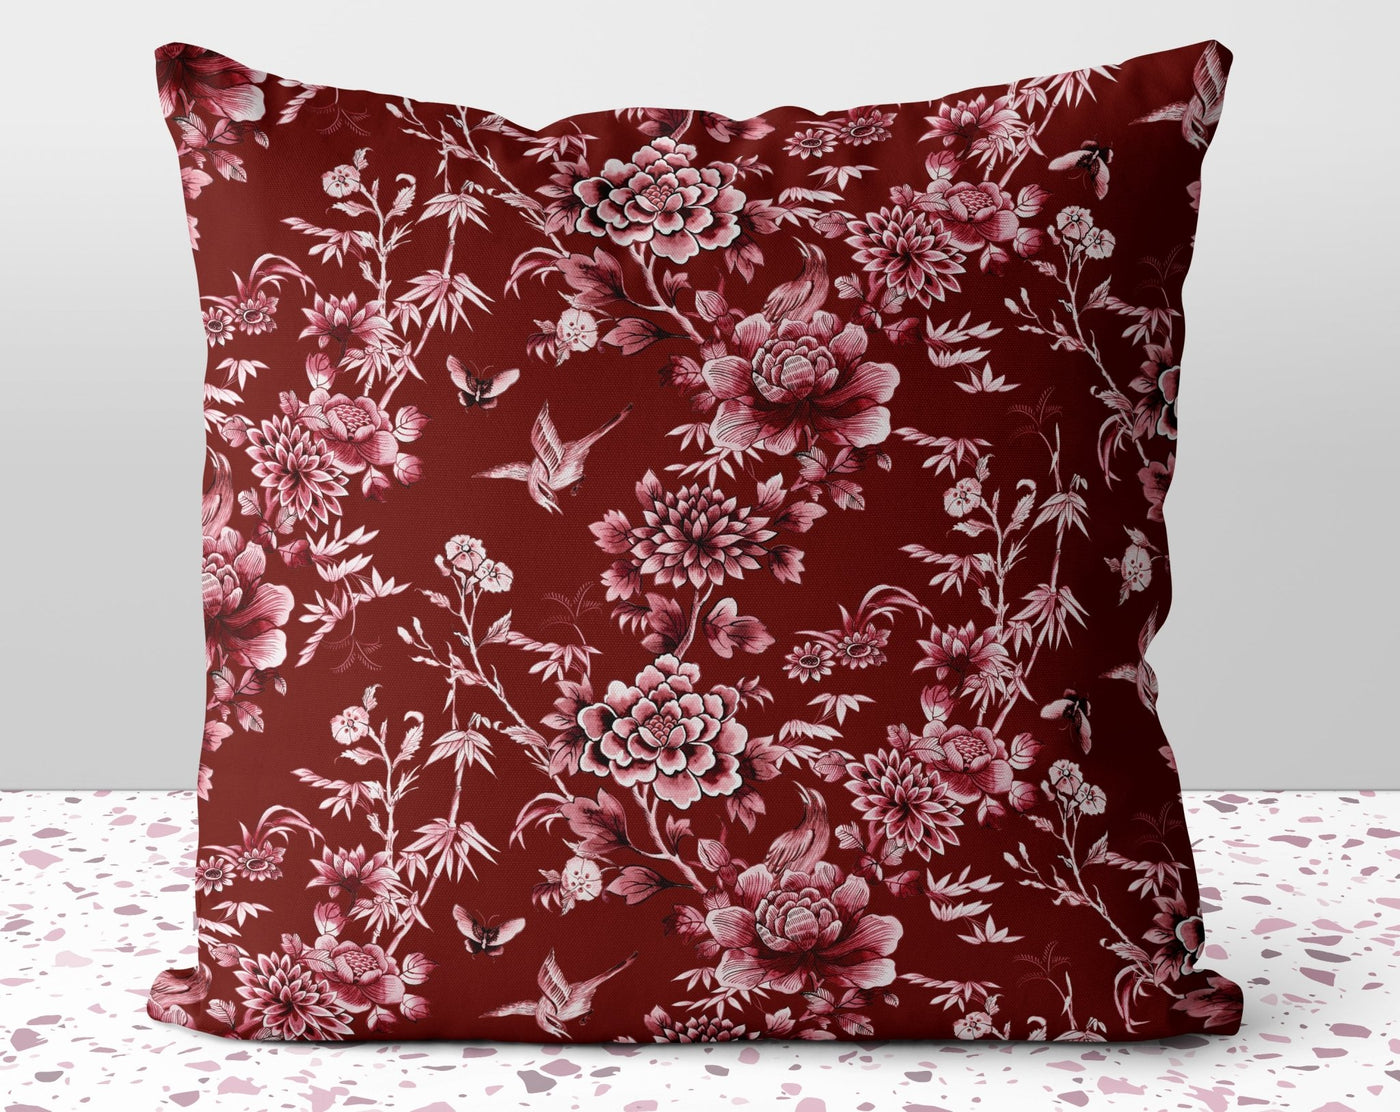 Floral Chinoiserie Flowers Red Pillow Throw Cover with Insert - Cush Potato Pillows